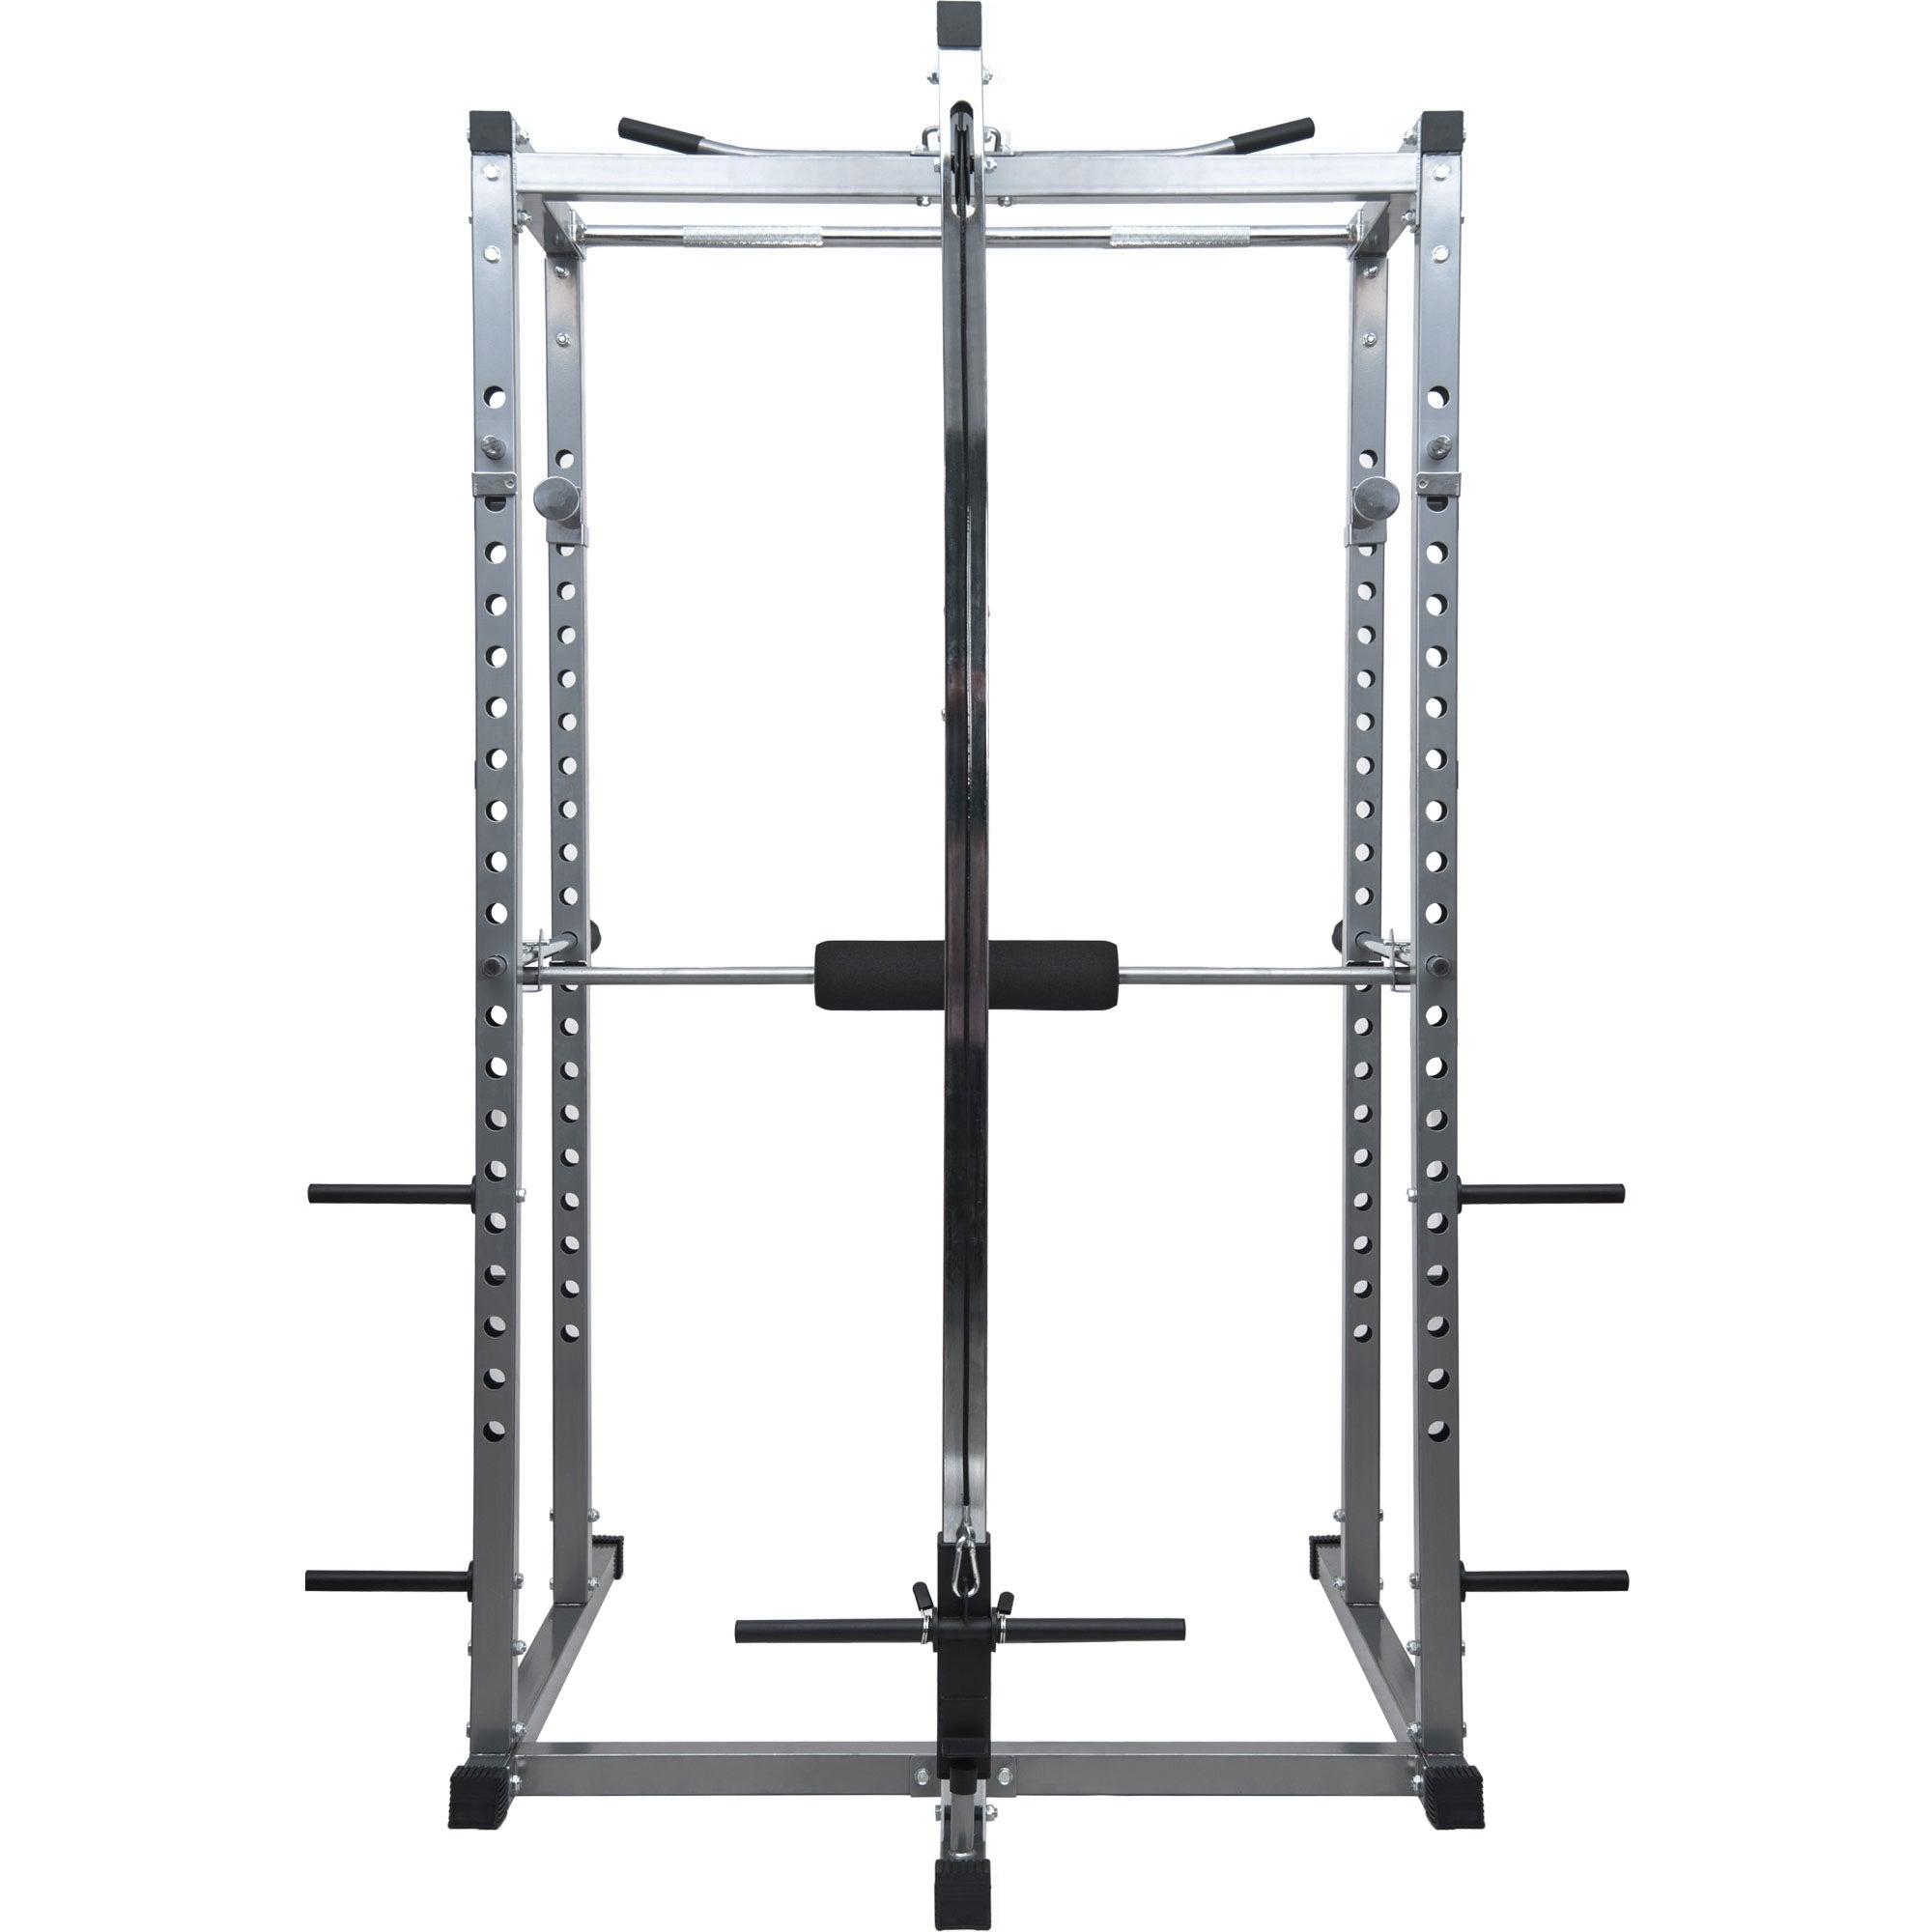 Multi-Function Power Cage with Lat Pull-Down and Low Row Home Gym Equipement